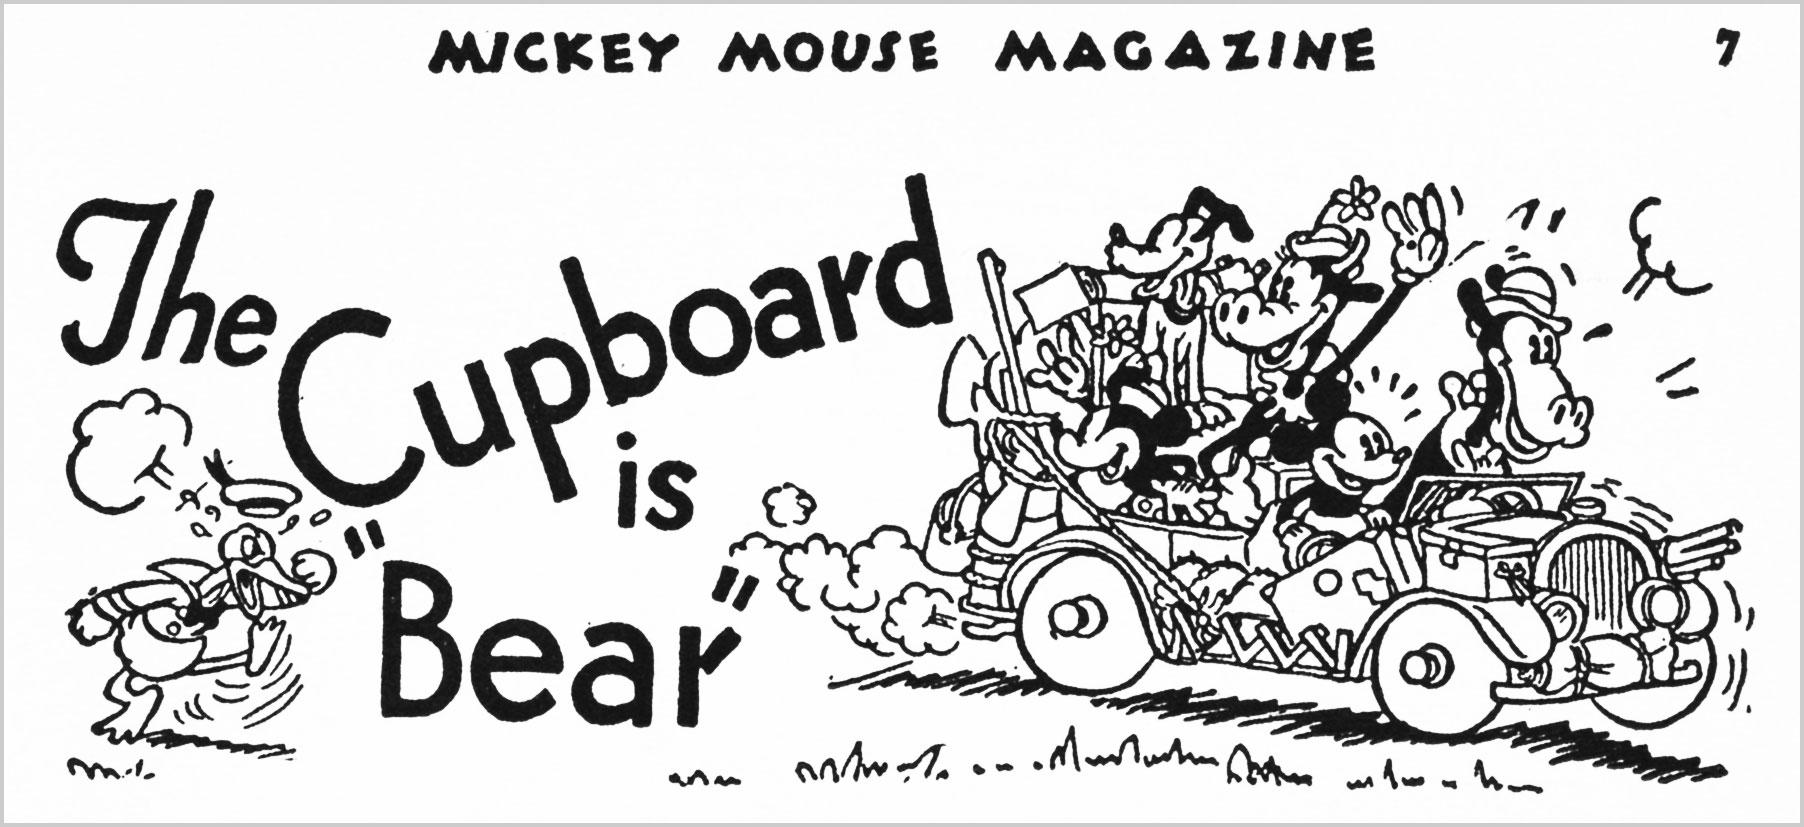 MickeyMouseMagMarch1935detail